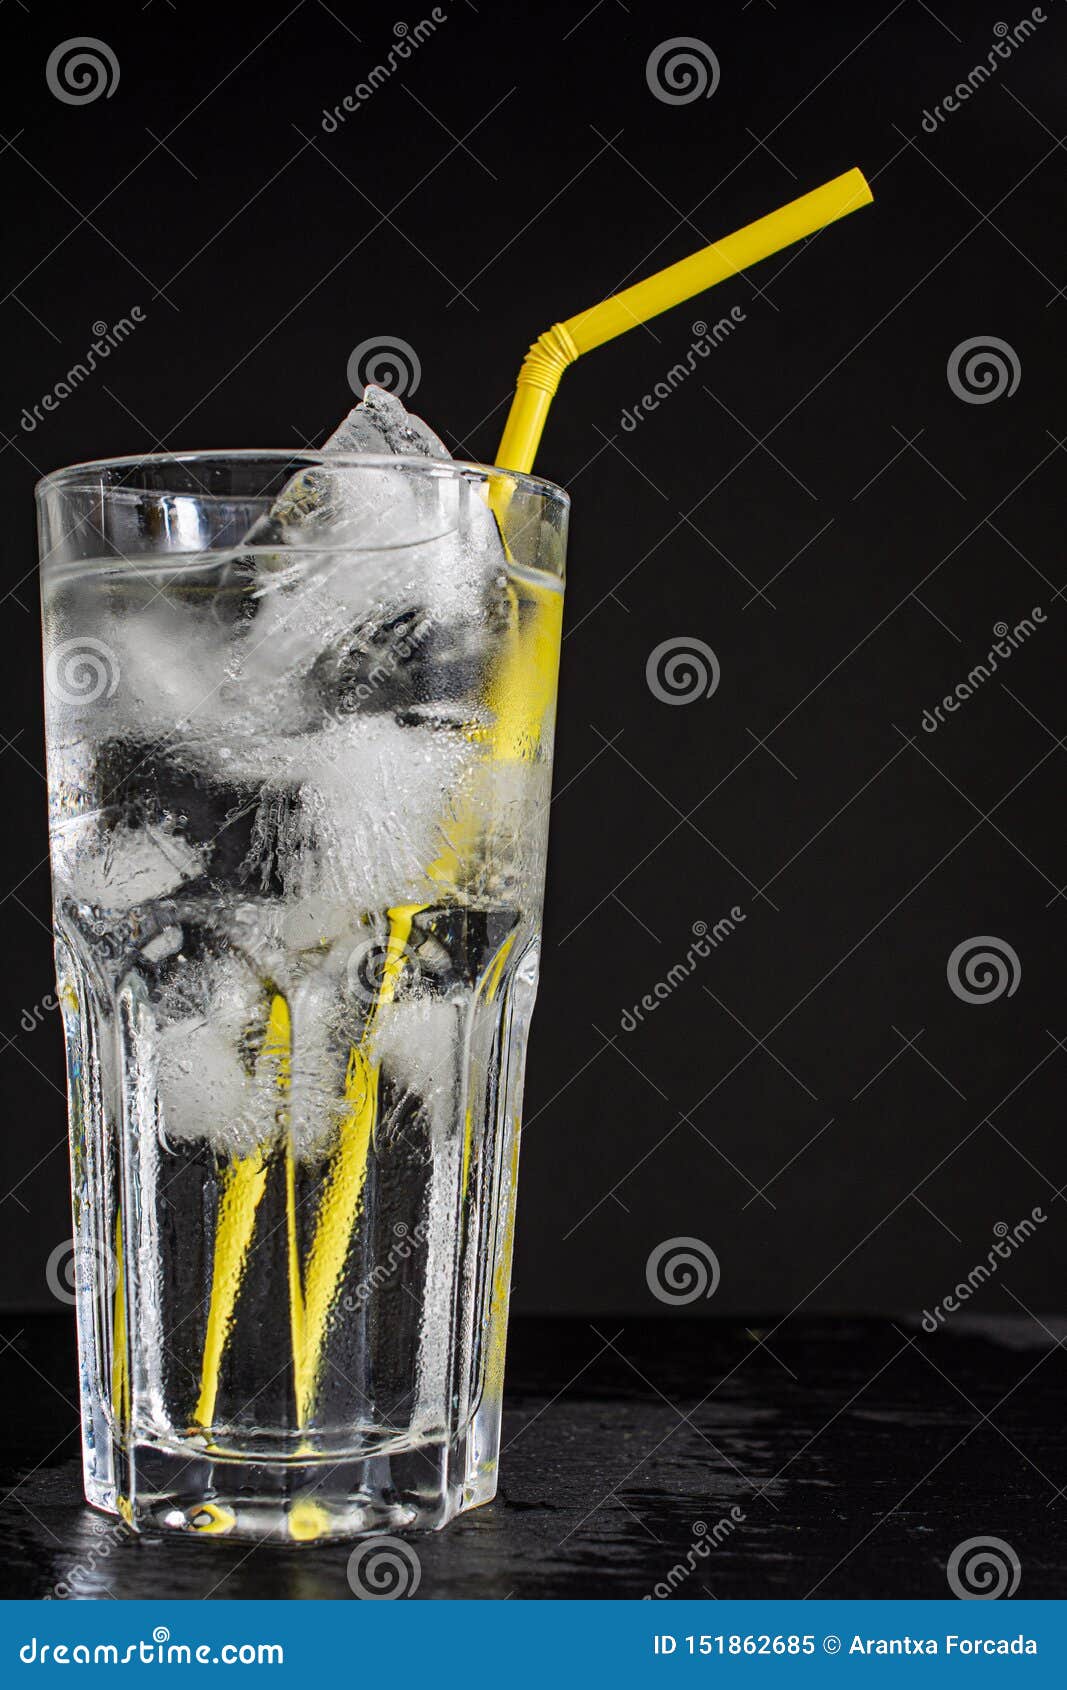 Glass Cup With Water Many Ice Cubes And Yellow Straw On A Black Background Stock Image Image Of Morning Clear